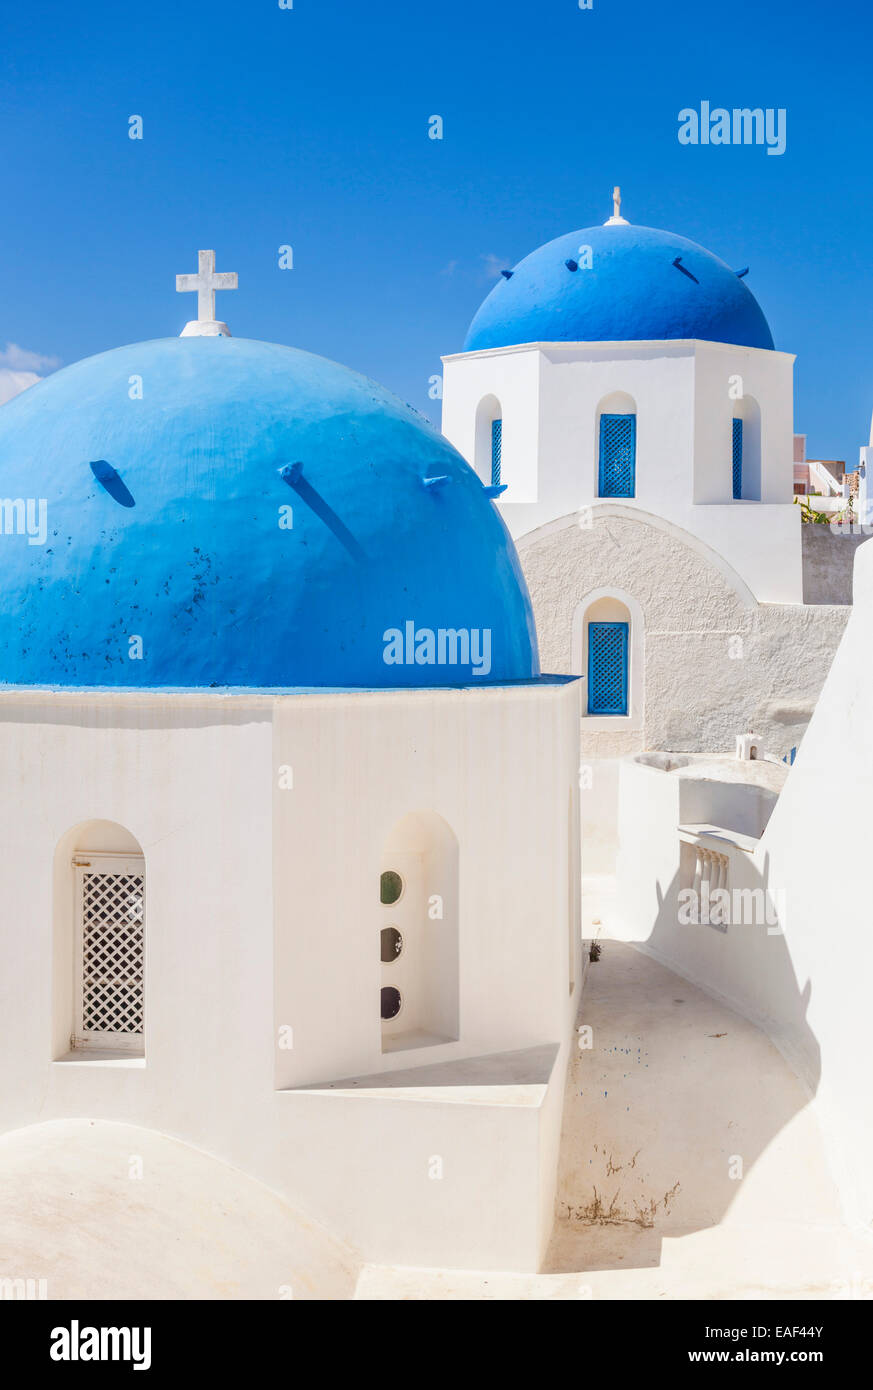 White churches and blue domes in the village of Oia, Santorini, Thira, Cyclades Islands, Greek Islands, Greece, EU, Europe Stock Photo